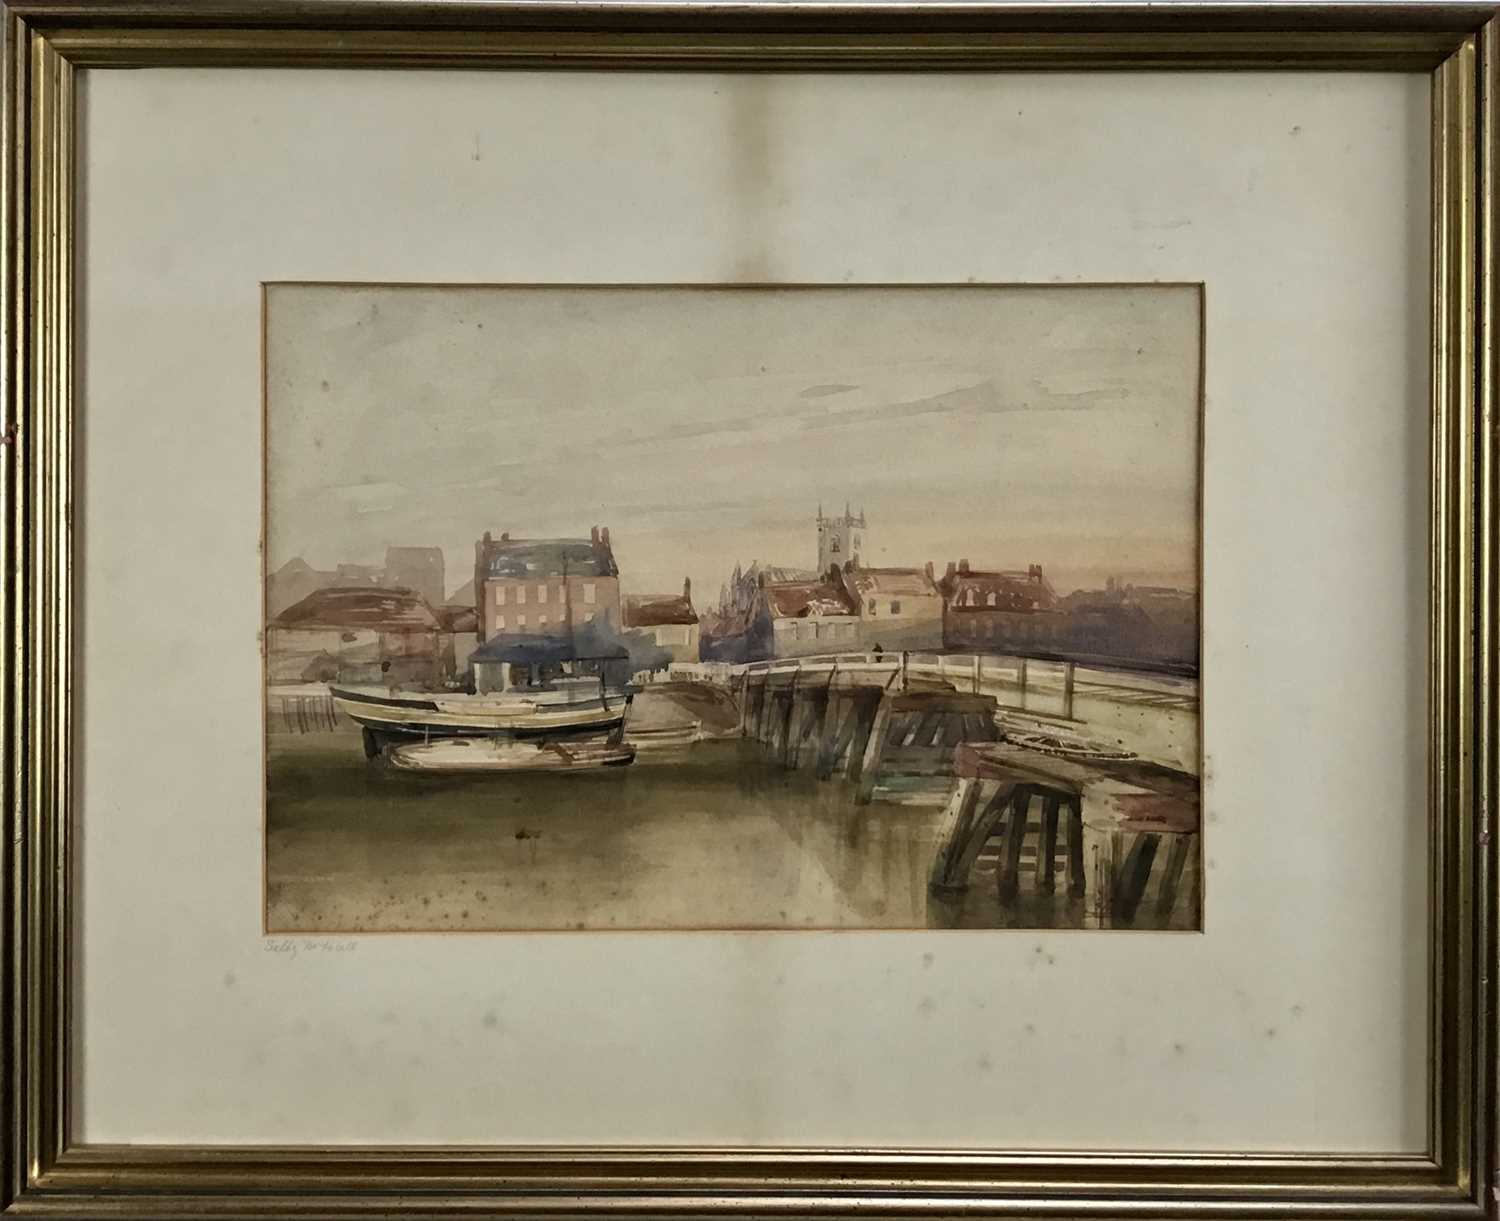 Lot 36 - R.M. Carter watercolour - Selby Old Wooden Swing Bridge indistinctly signed and dated, inscribed on mount 'Selby nr. Hull'